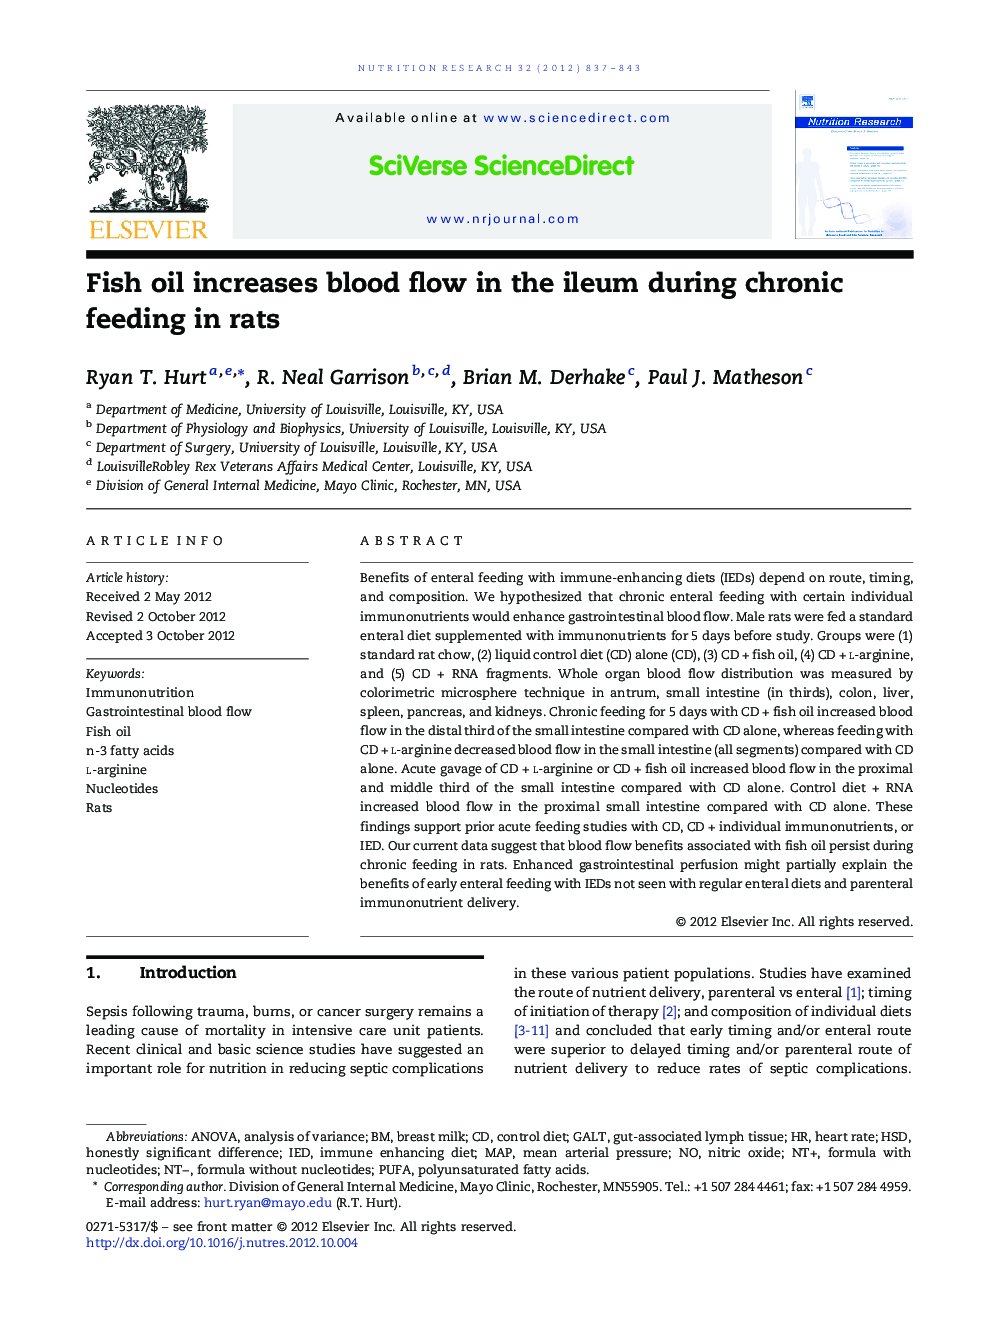 Fish oil increases blood flow in the ileum during chronic feeding in rats